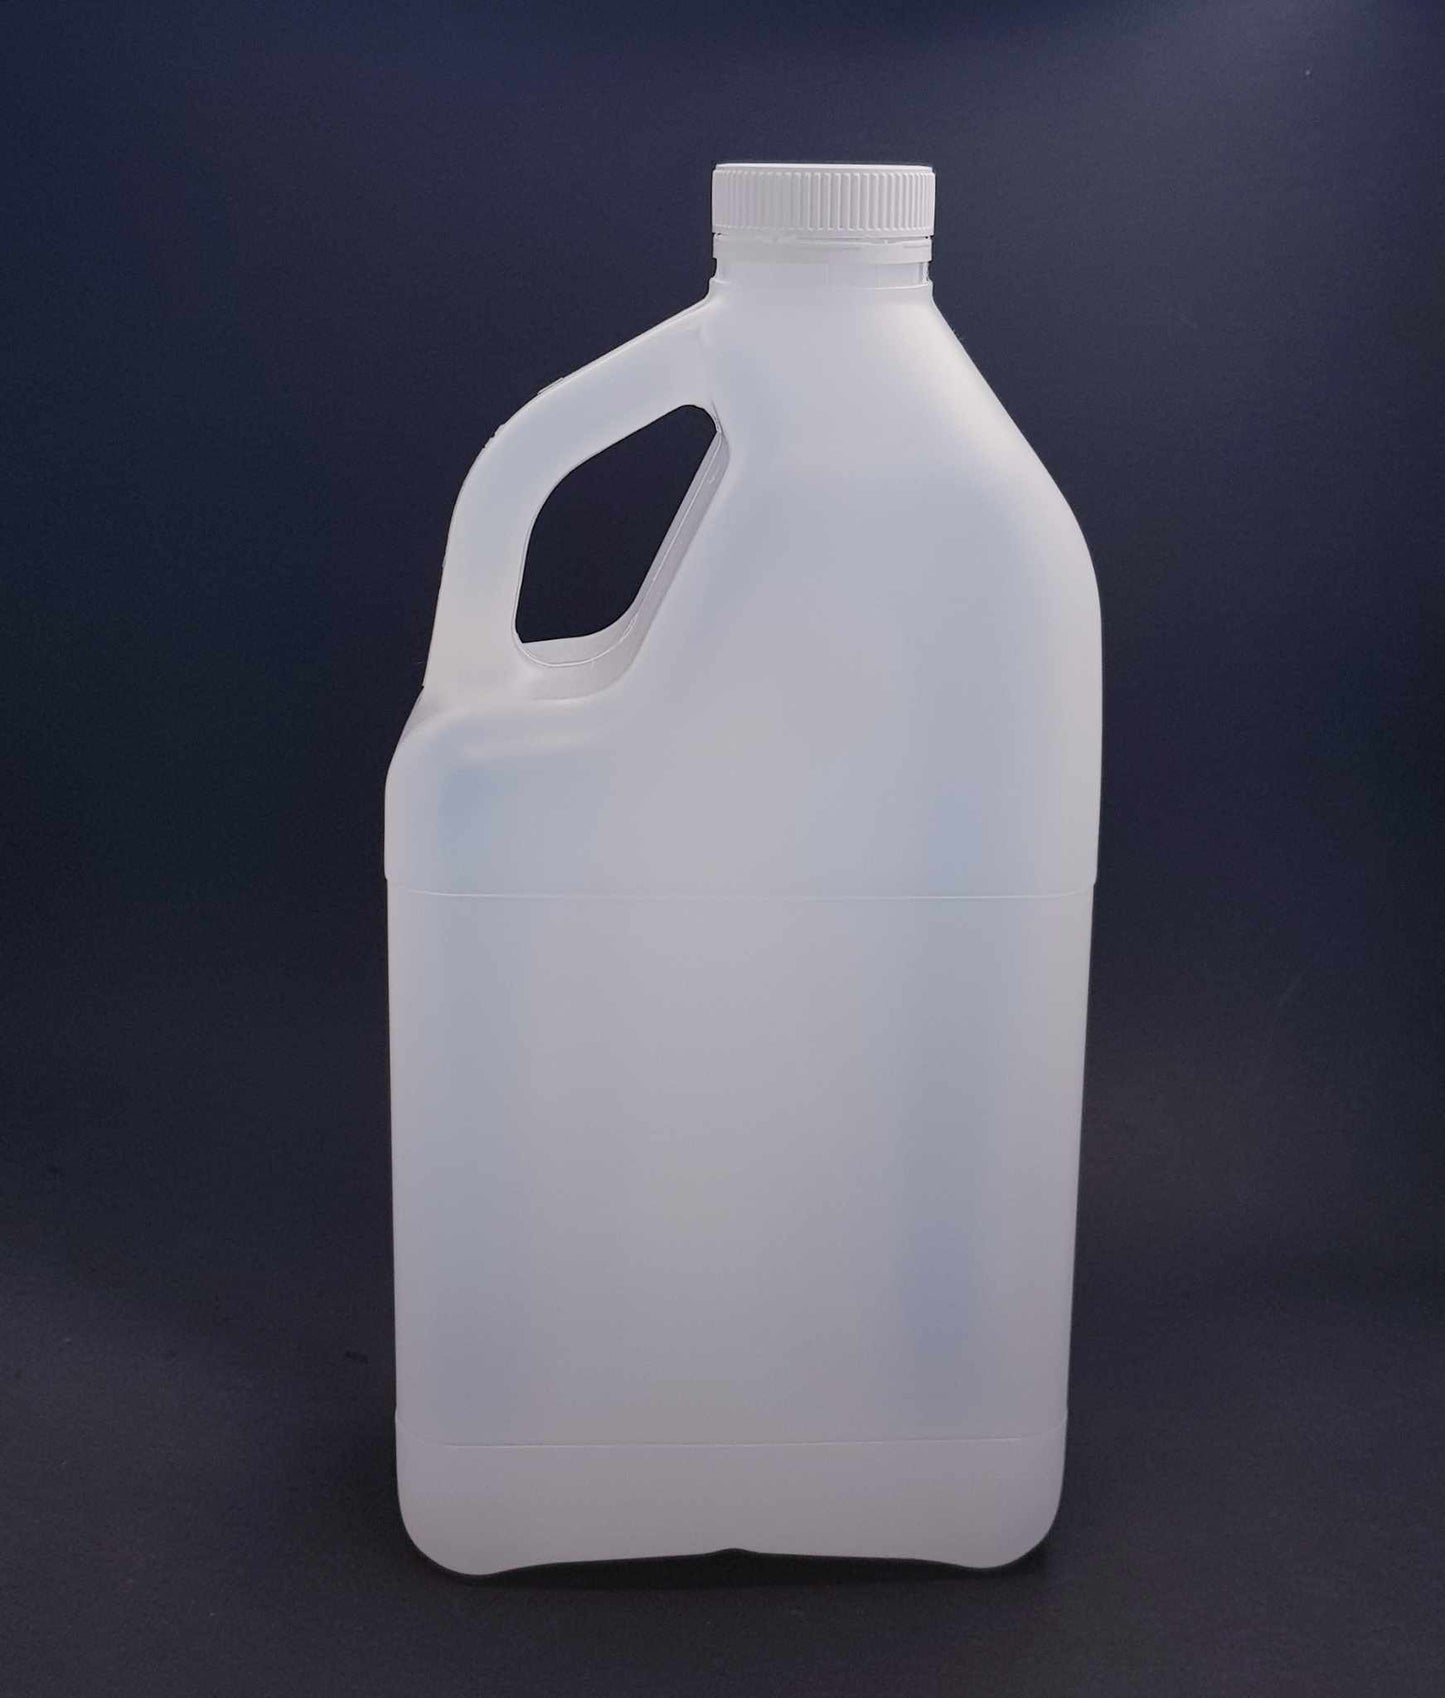 2 Litre or 2000ml Milk Bottle Plastic with Handle and White 38mm TE Cap 